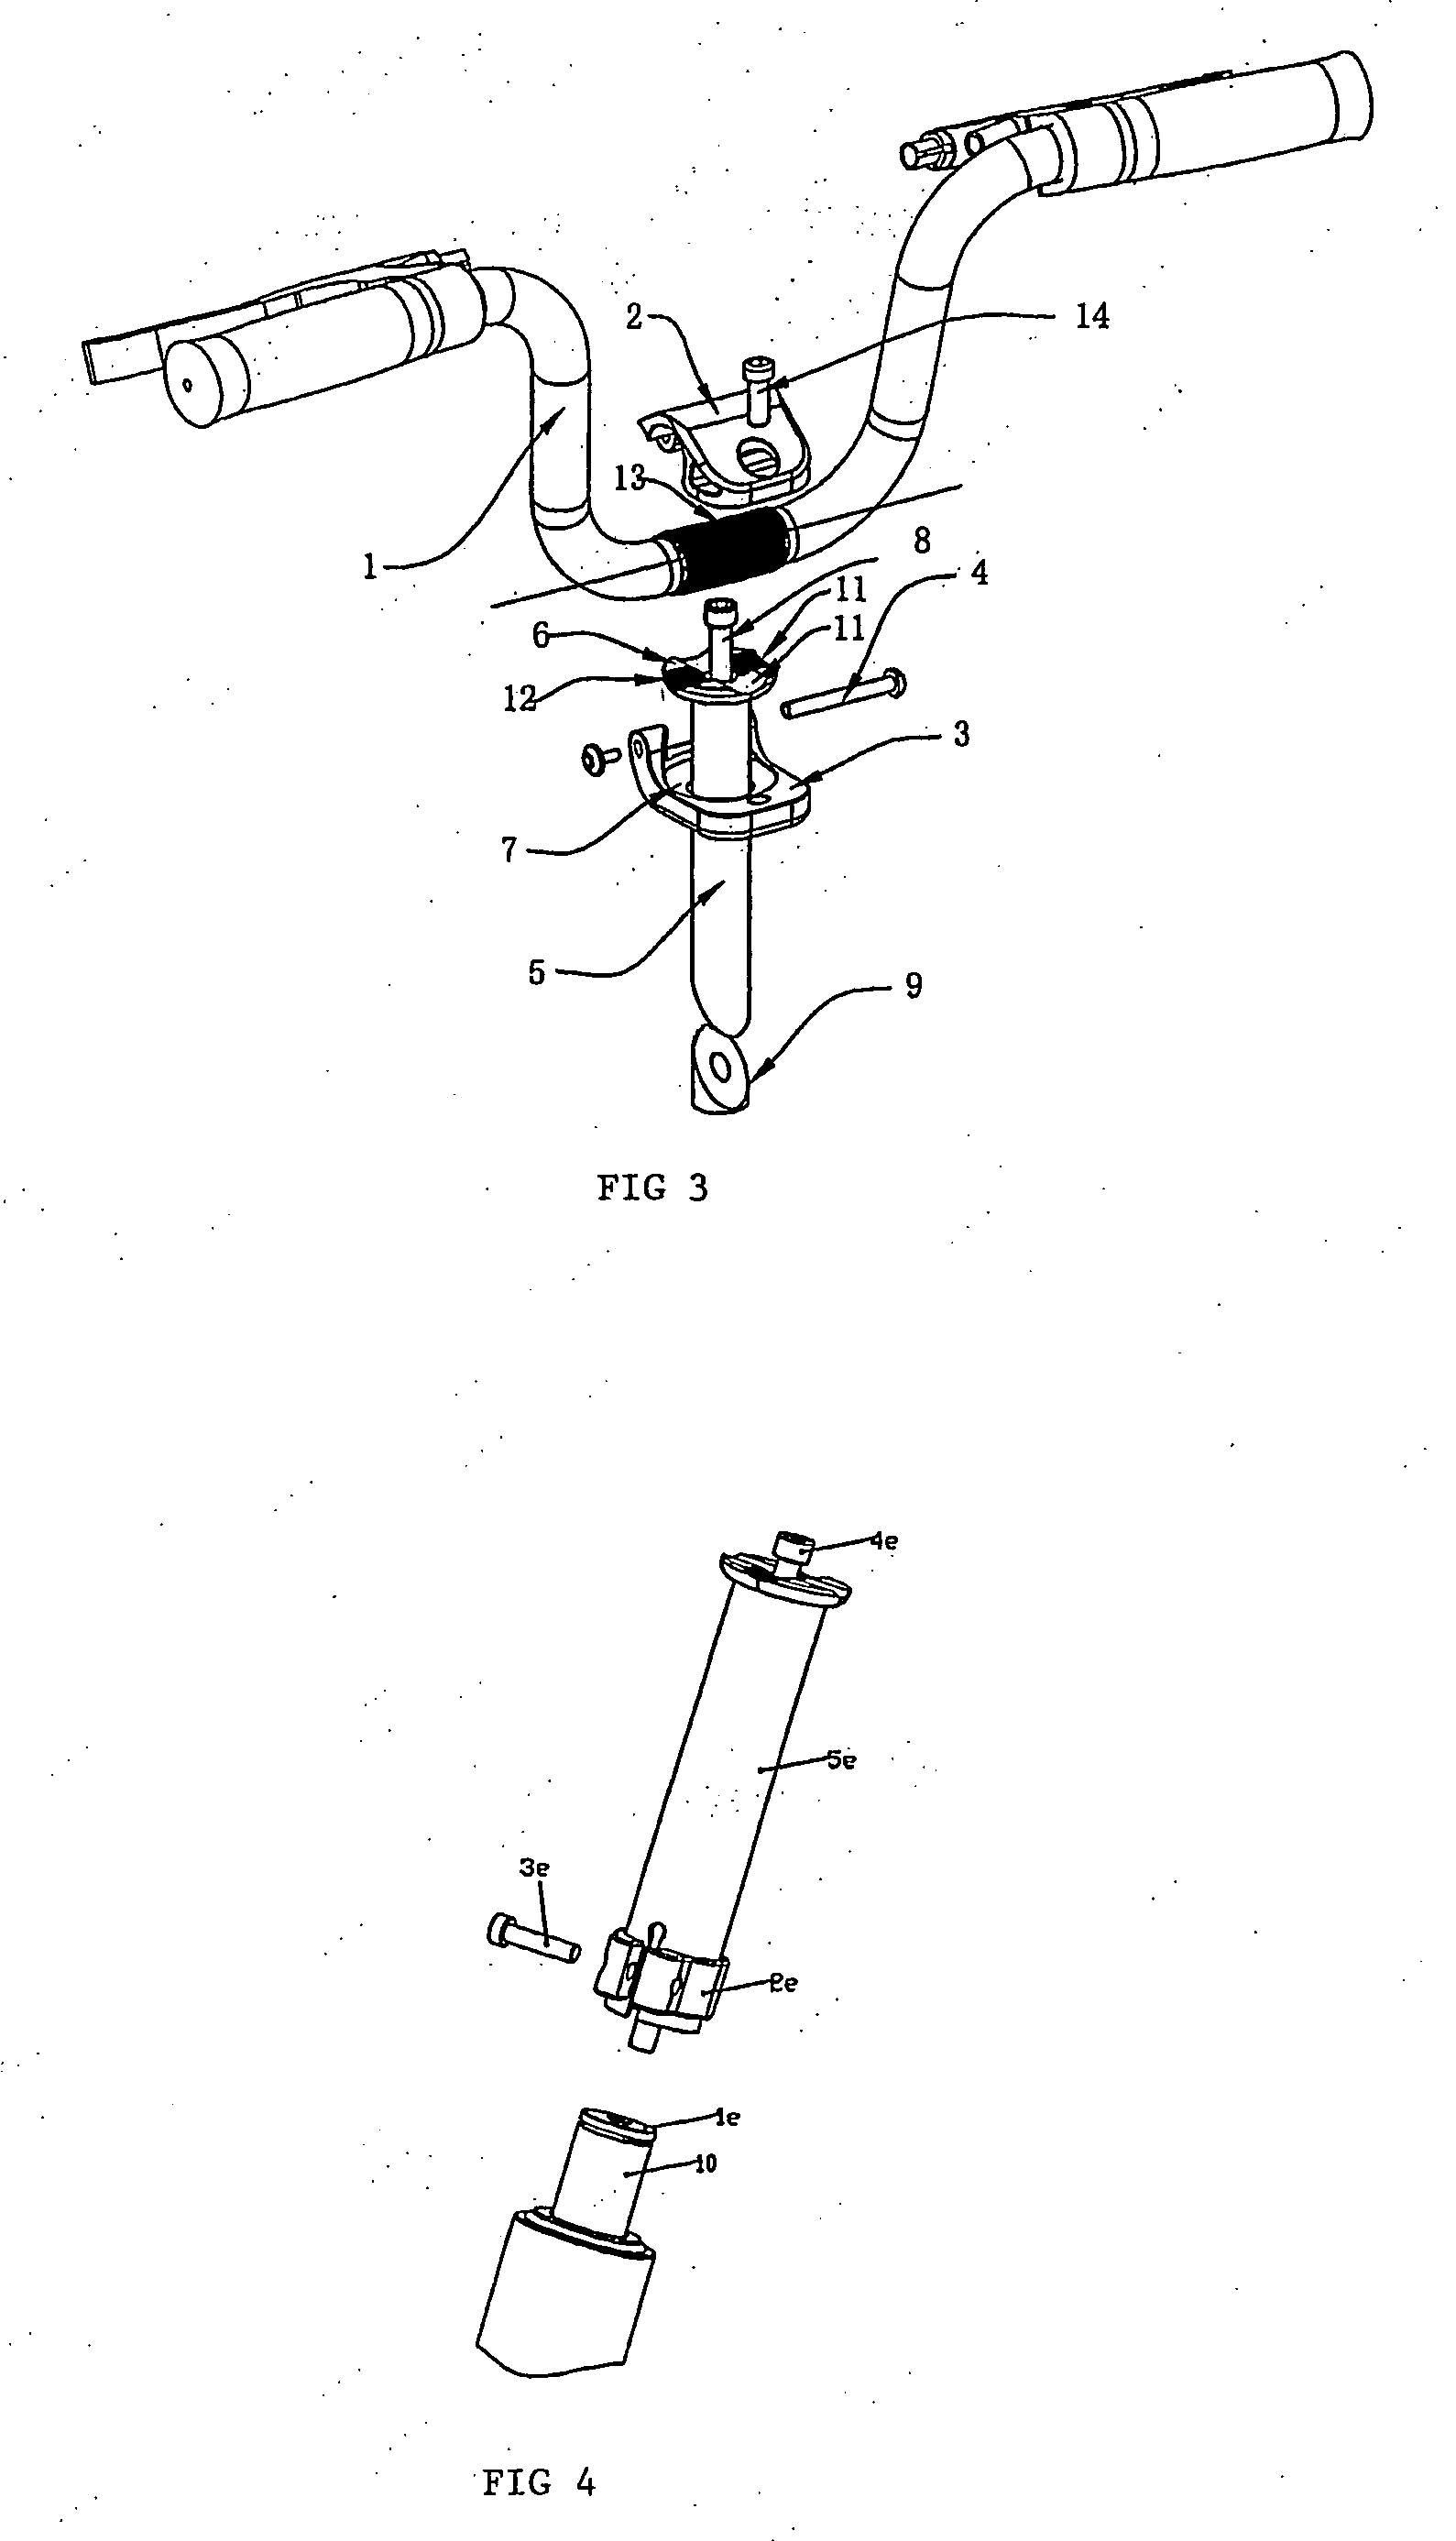 Adjusting Mechanism for Handle Position of Bicycle